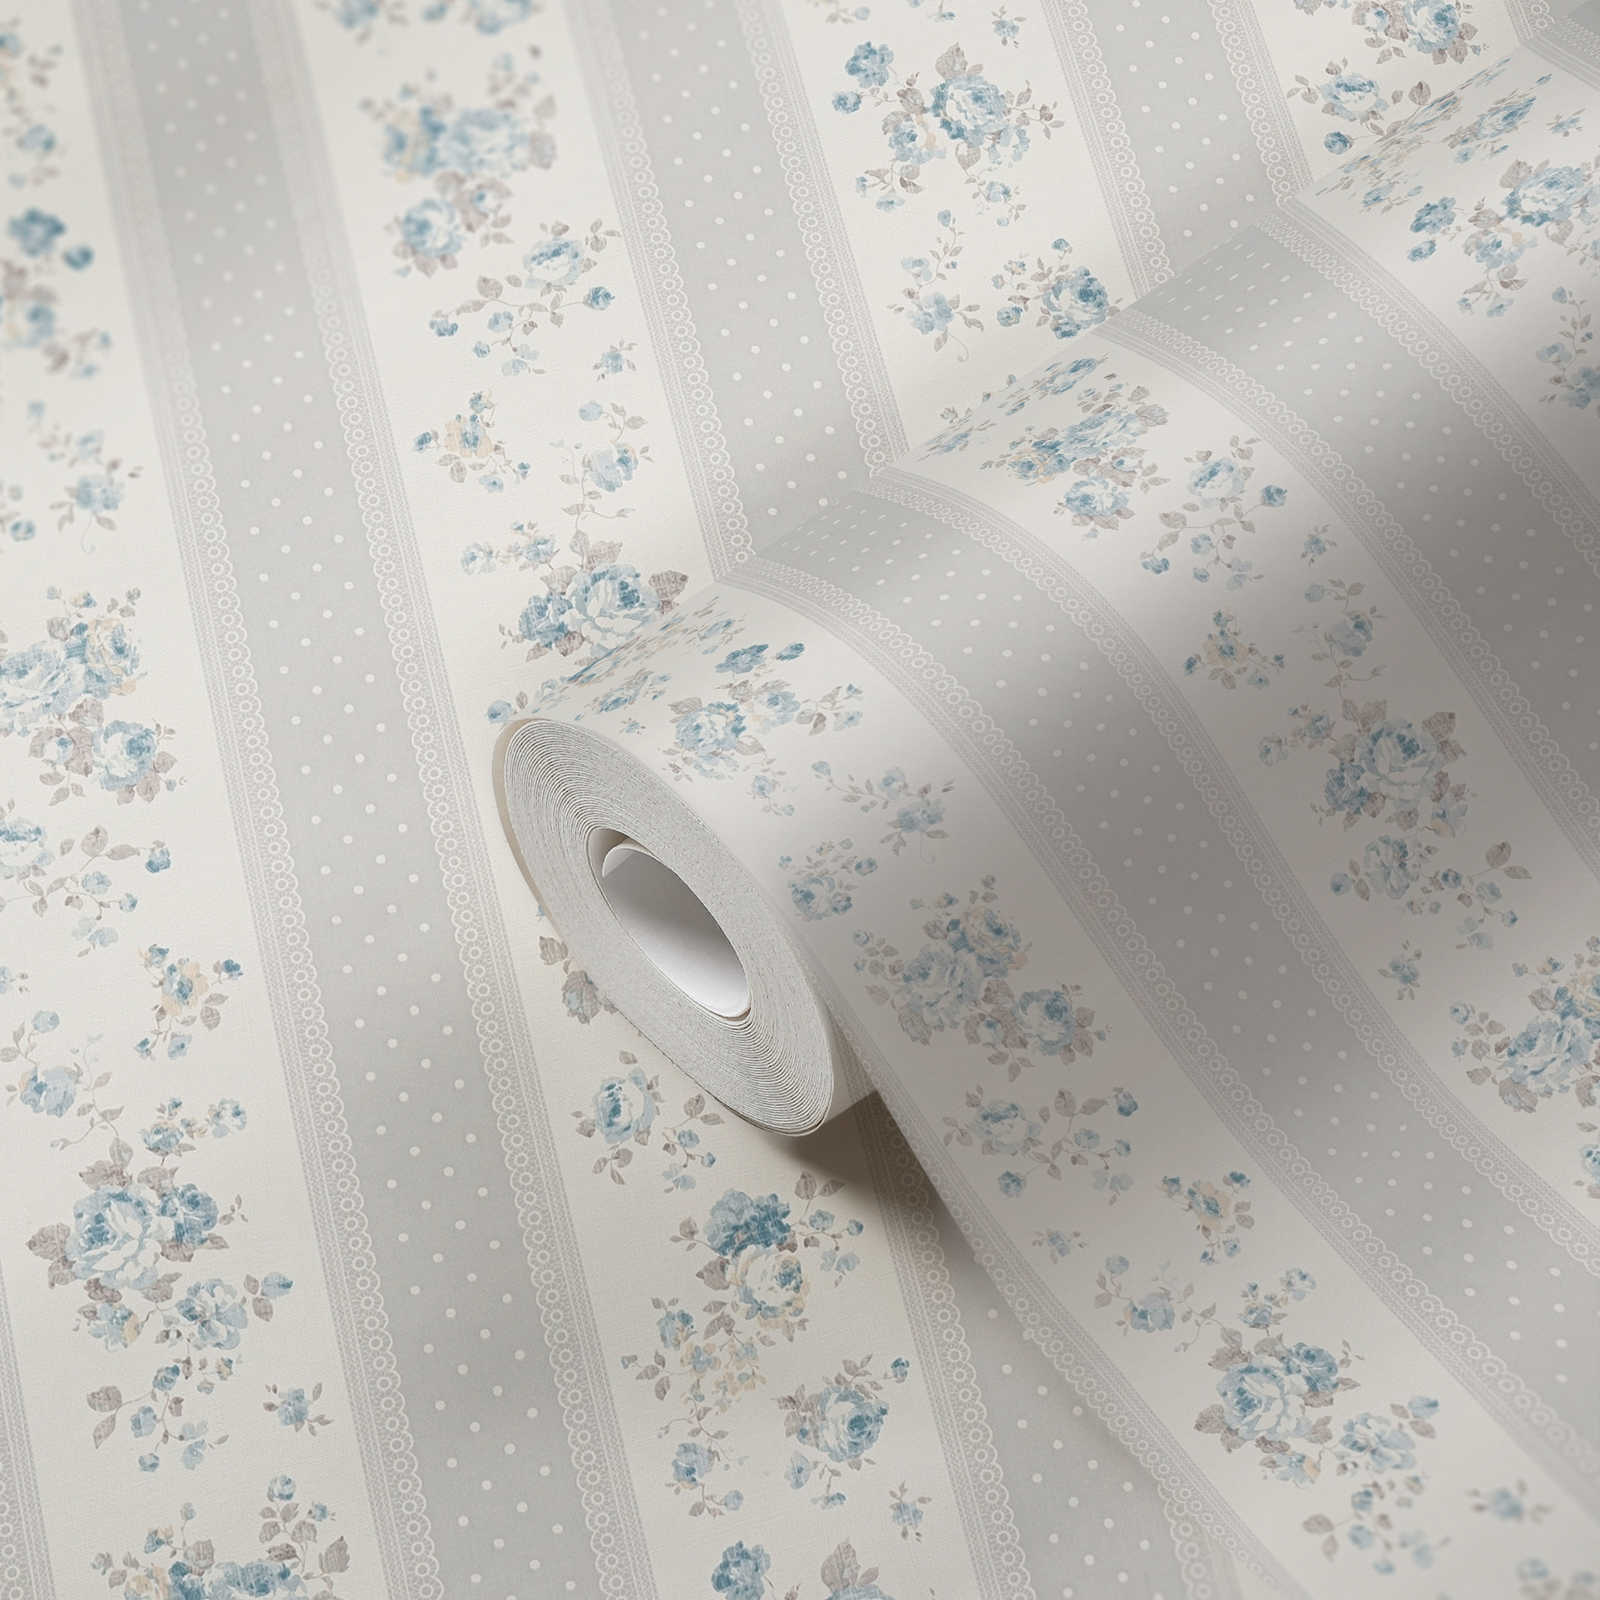             Non-woven wallpaper with dotted and floral stripes - grey, white, blue
        